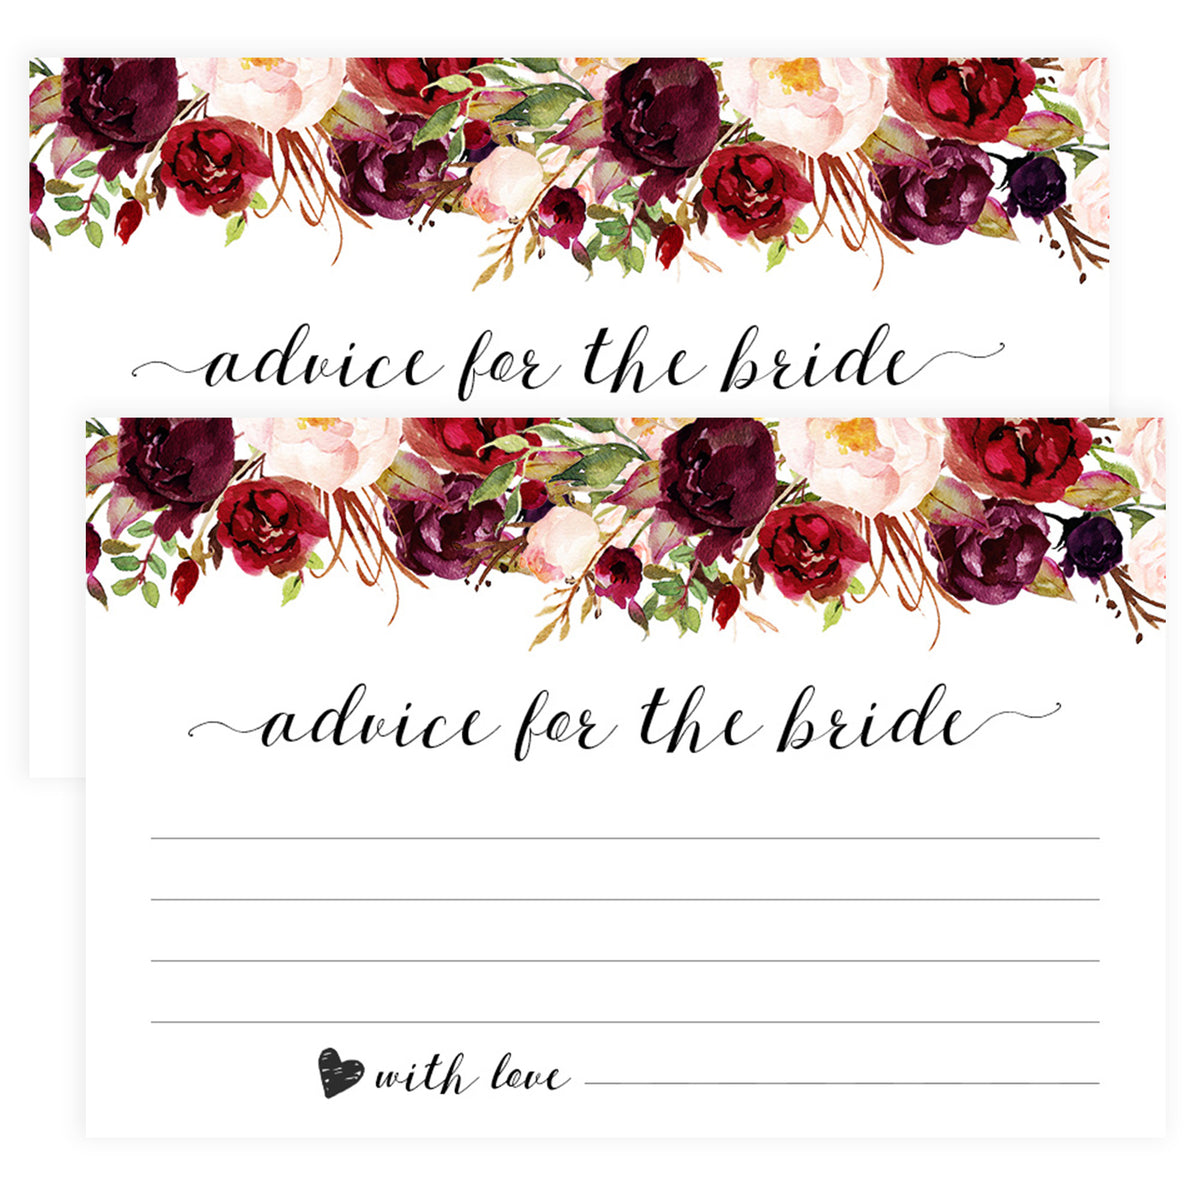 Advice for the Bride Cards - White Marsala